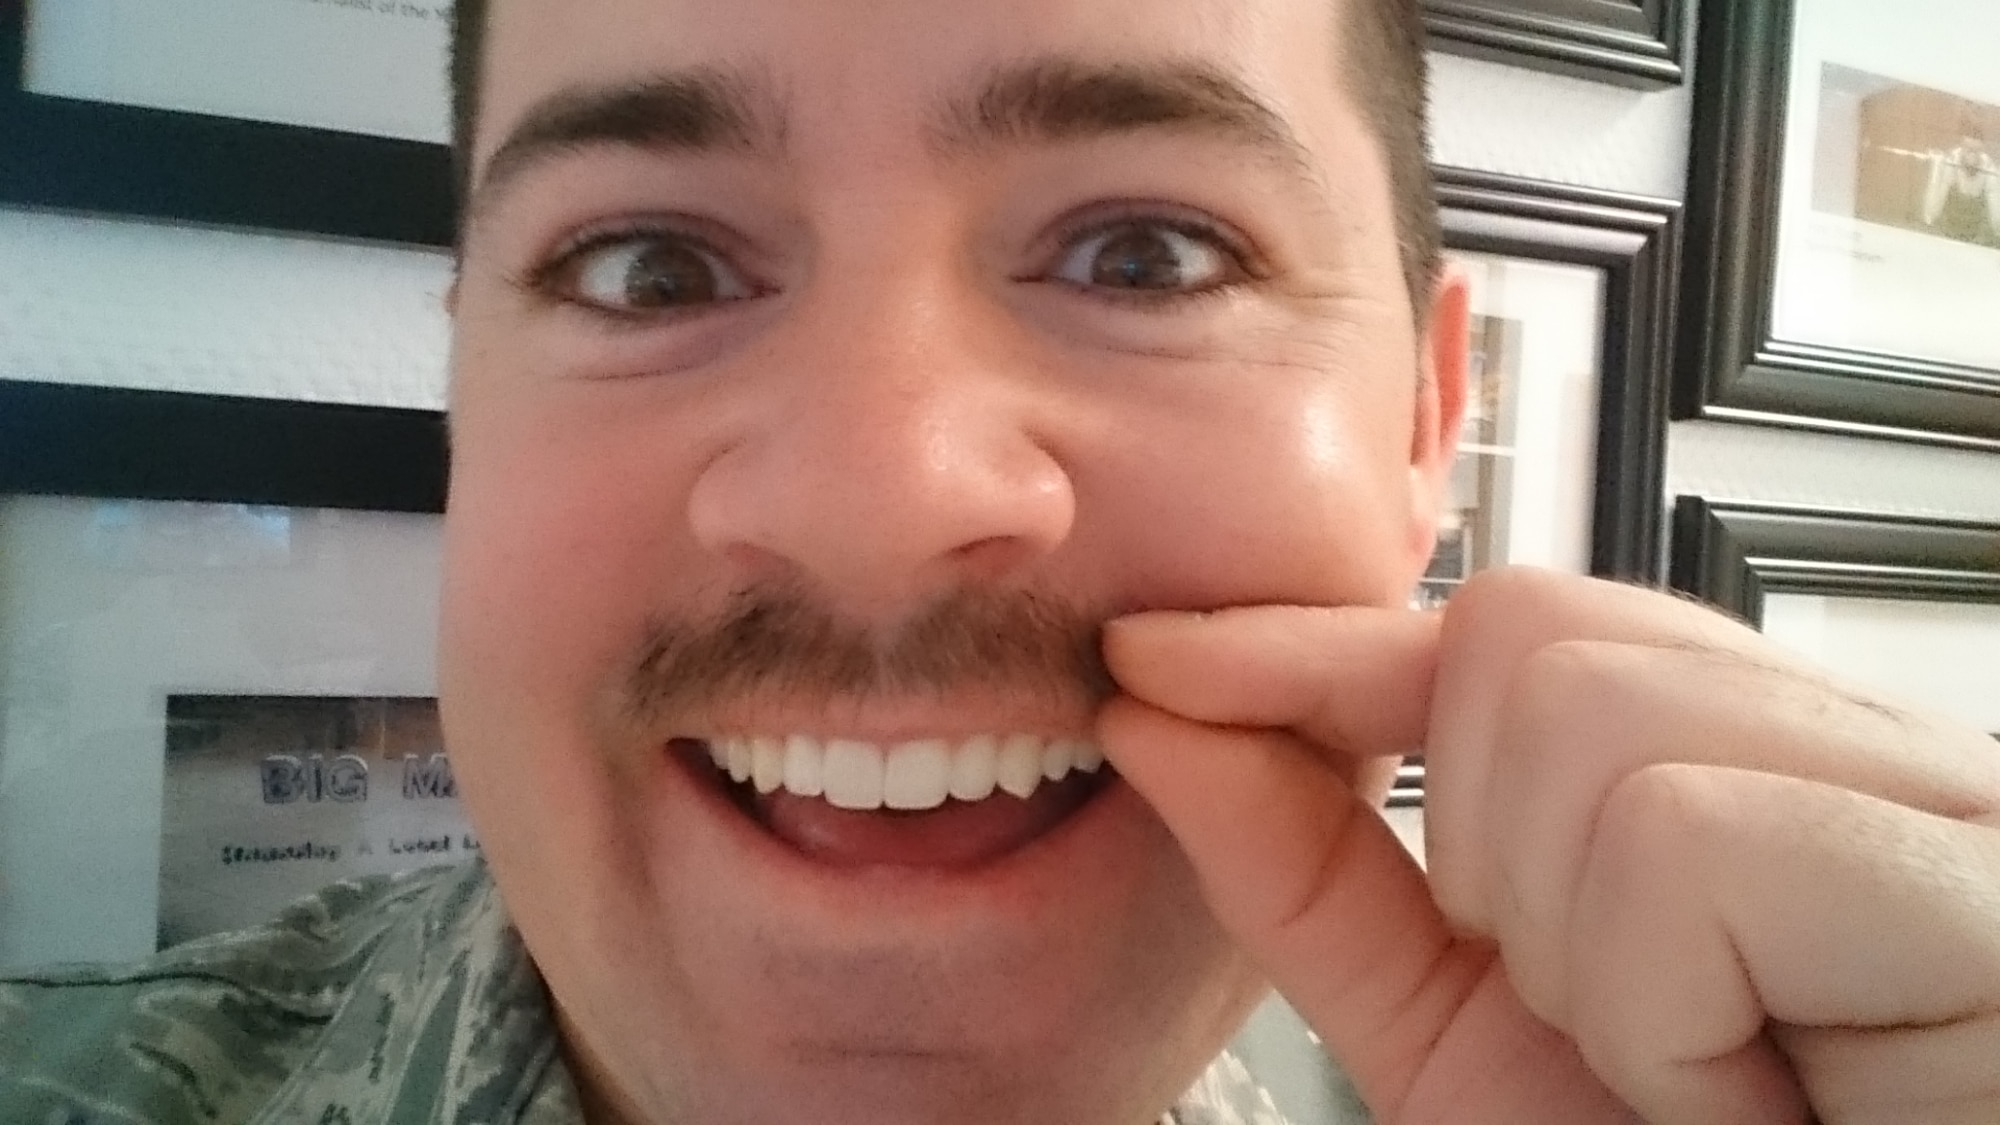 U.S. Air Force Staff Sgt. Christopher Ruano, a 52nd Fighter Wing public affairs photojournalist, takes a selfie with his mustache, Gregory, in honor of Mustache March, March 14, 2016. Mustache March is an Air Force tradition that started during the Vietnam War and is still practiced today. (U.S. Air Force selfie by Staff Sgt. Christopher Ruano/Released)